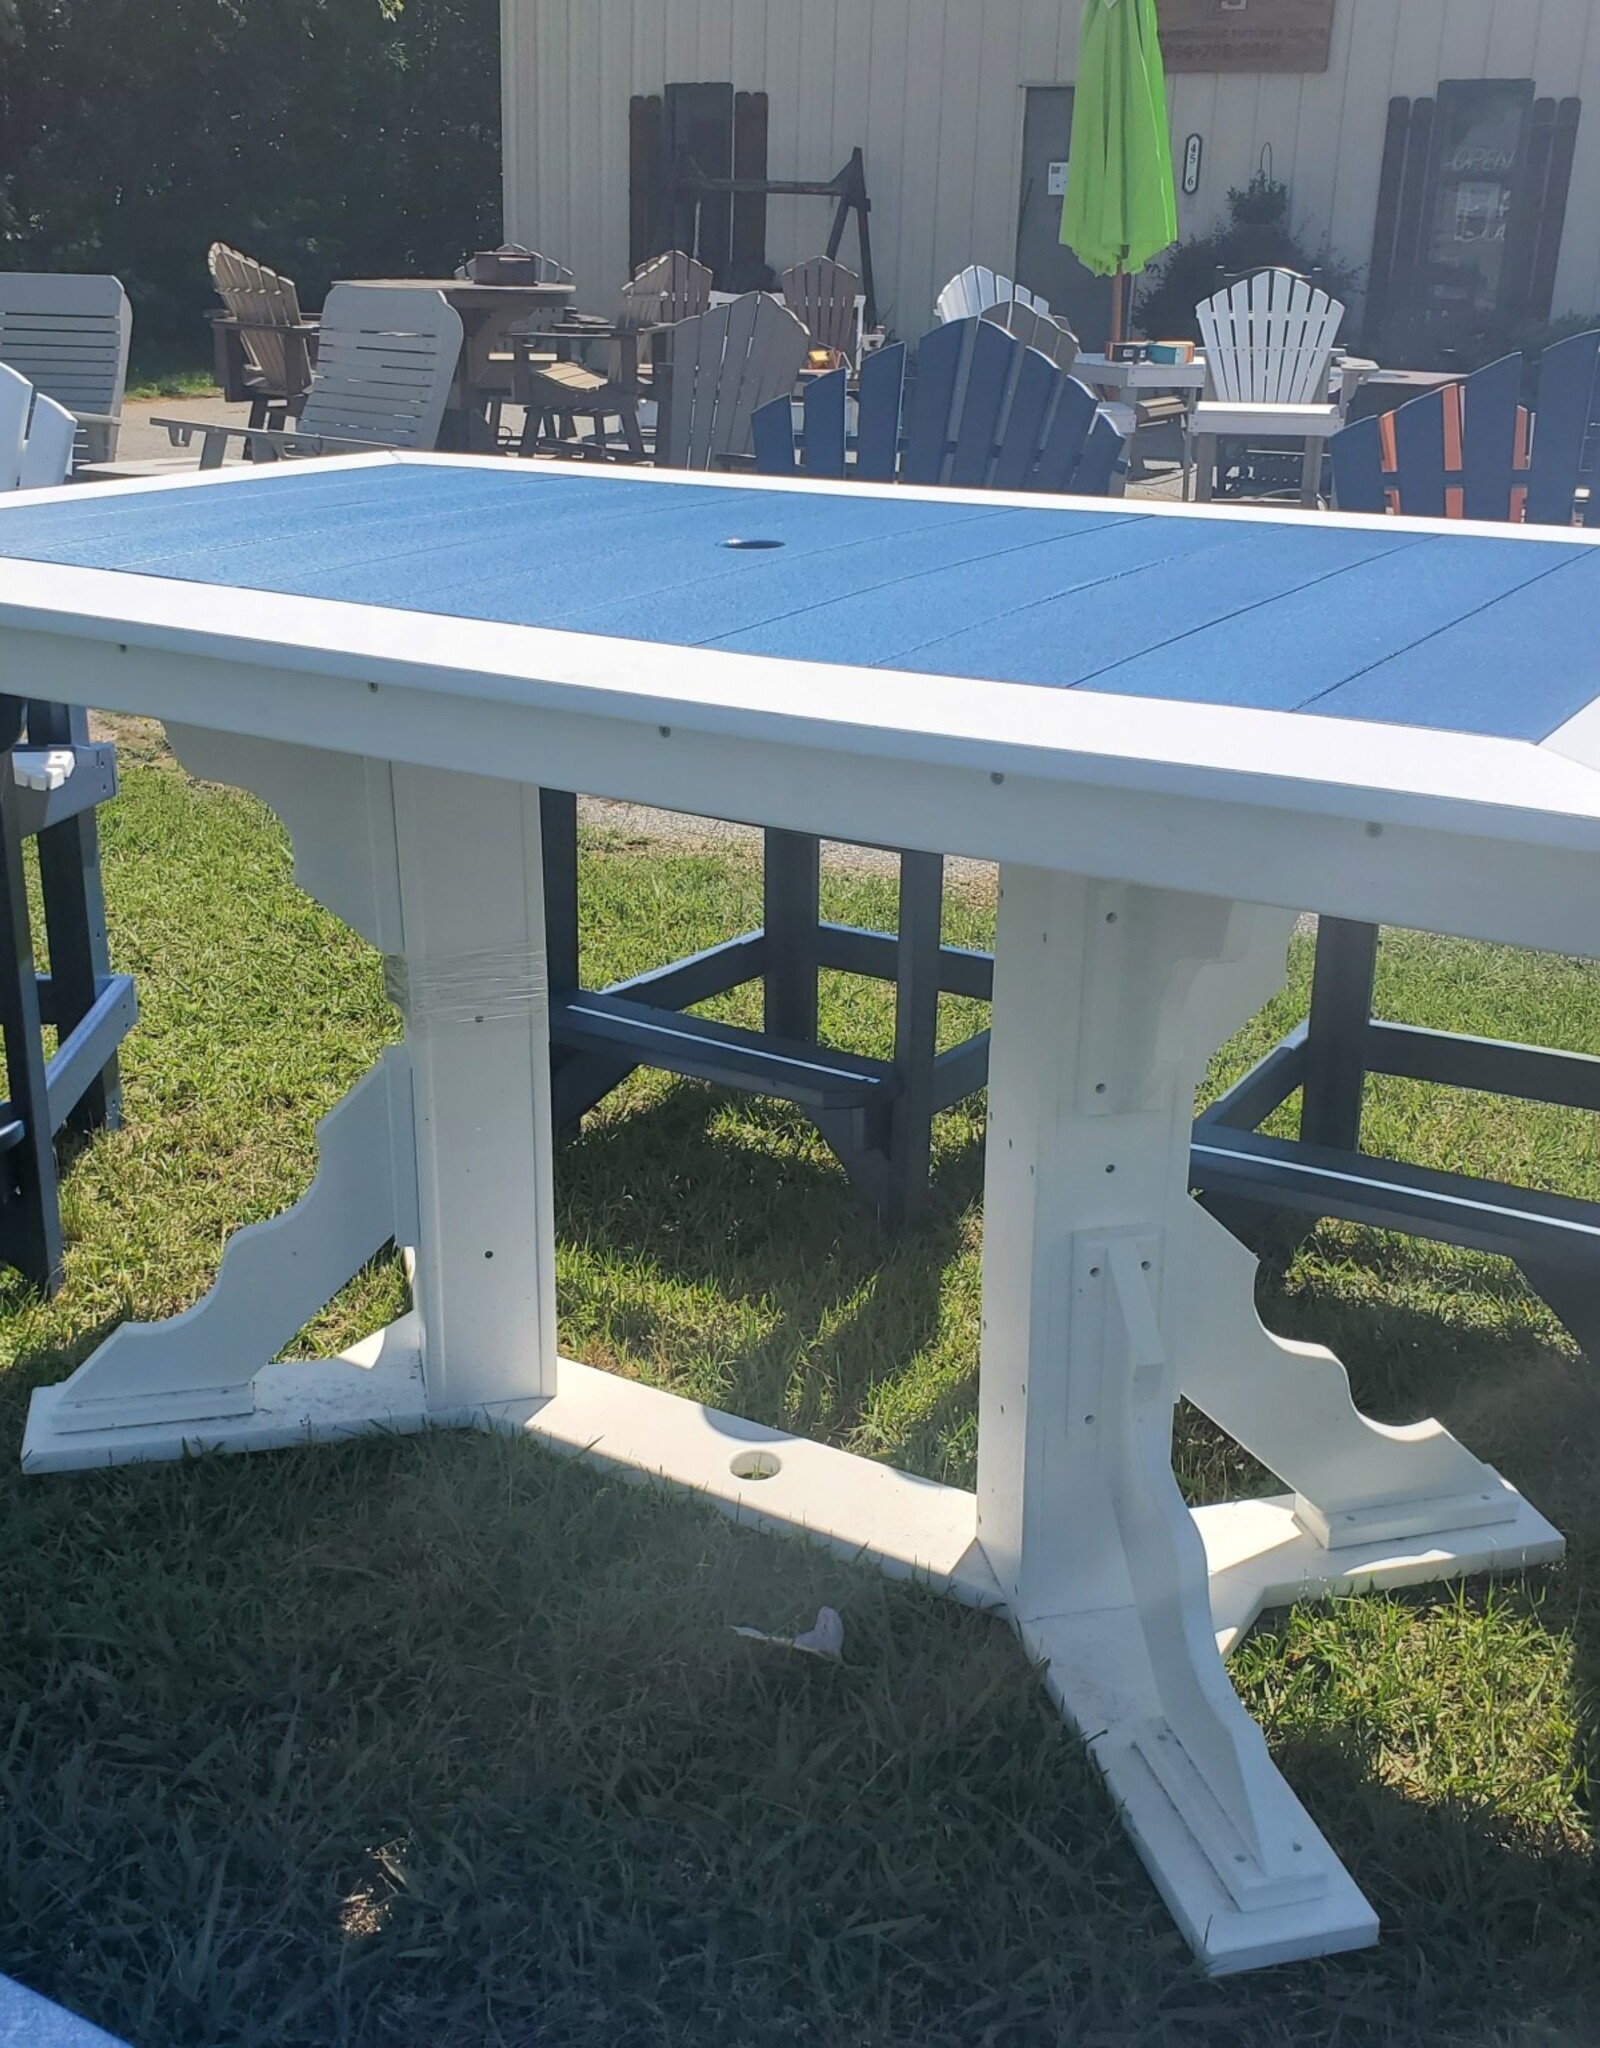 HDM Outdoor 44" x 72" Rectangular  Outdoor Counter-Height Table  w/ 6 Stationary Captain's Chairs